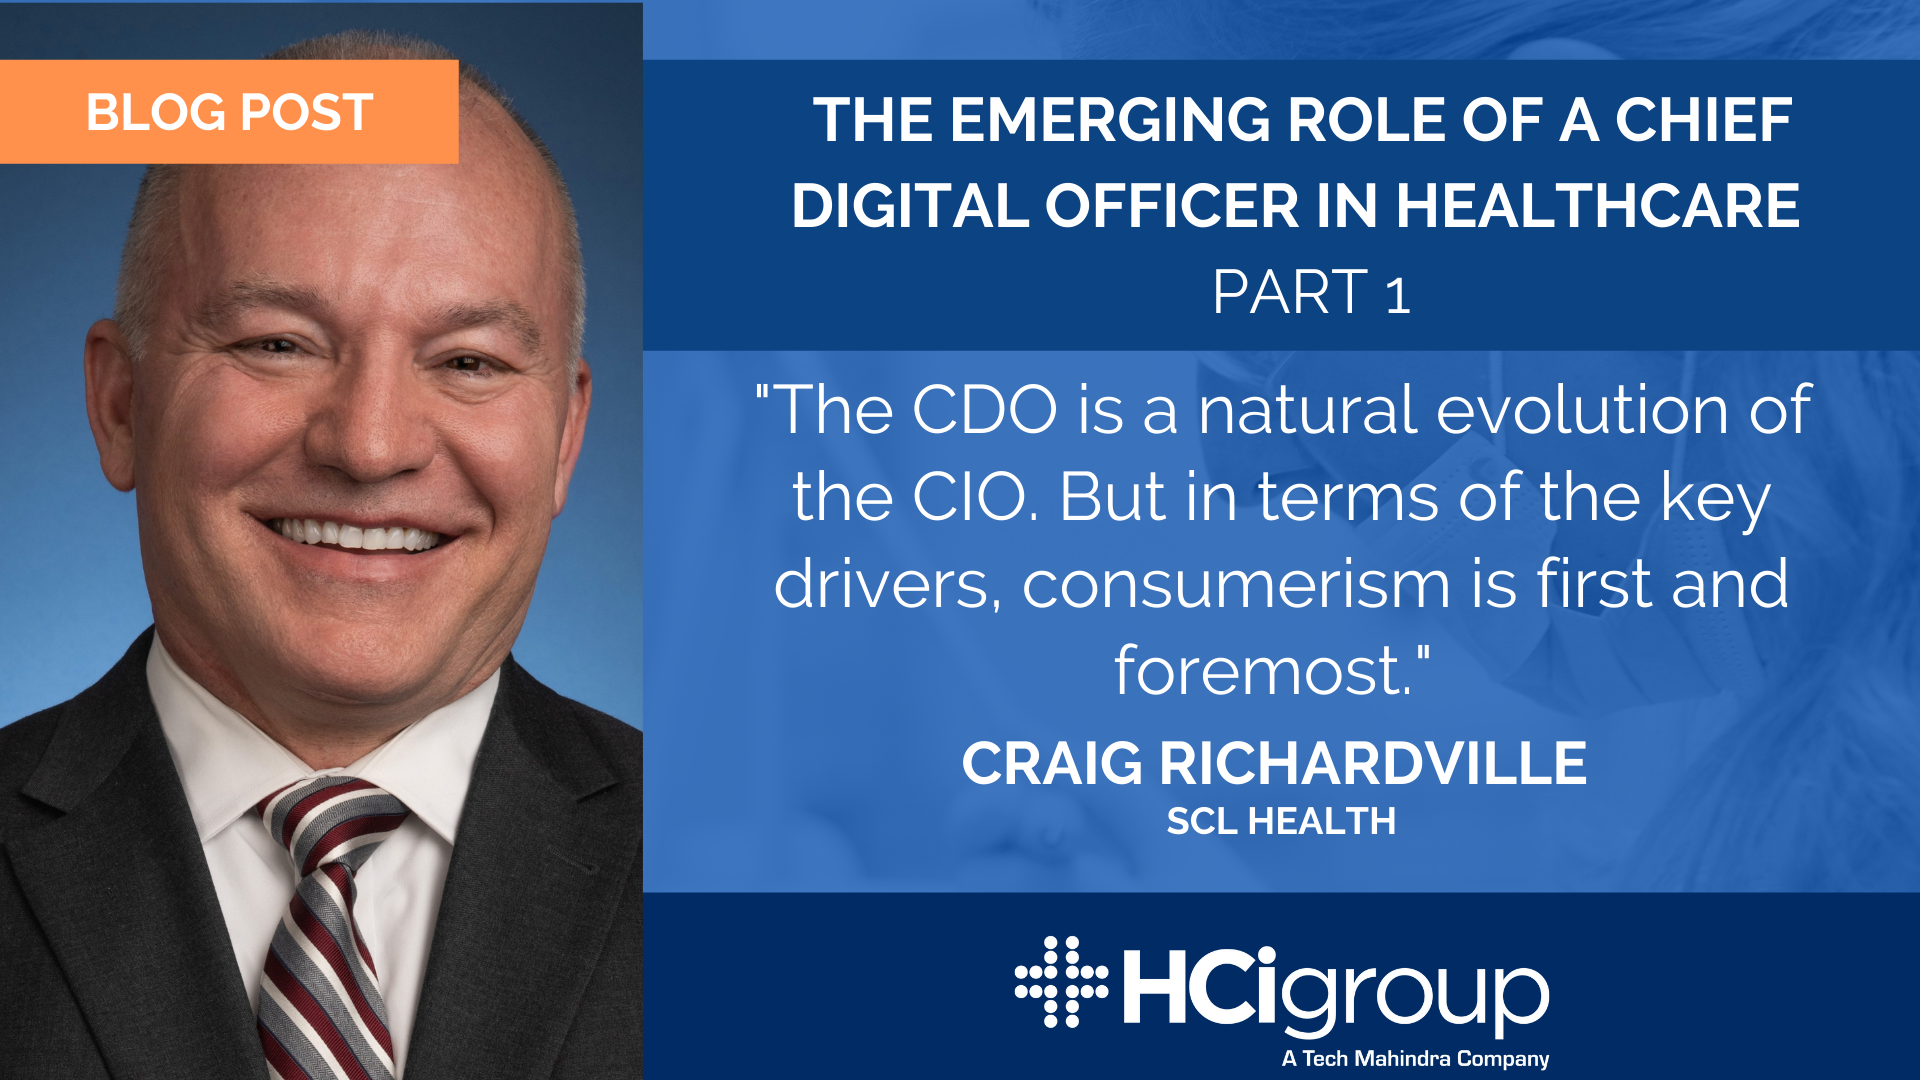 The Emerging Role of a Chief Digital Officer in Healthcare: A Conversation with Craig Richardville - Part I